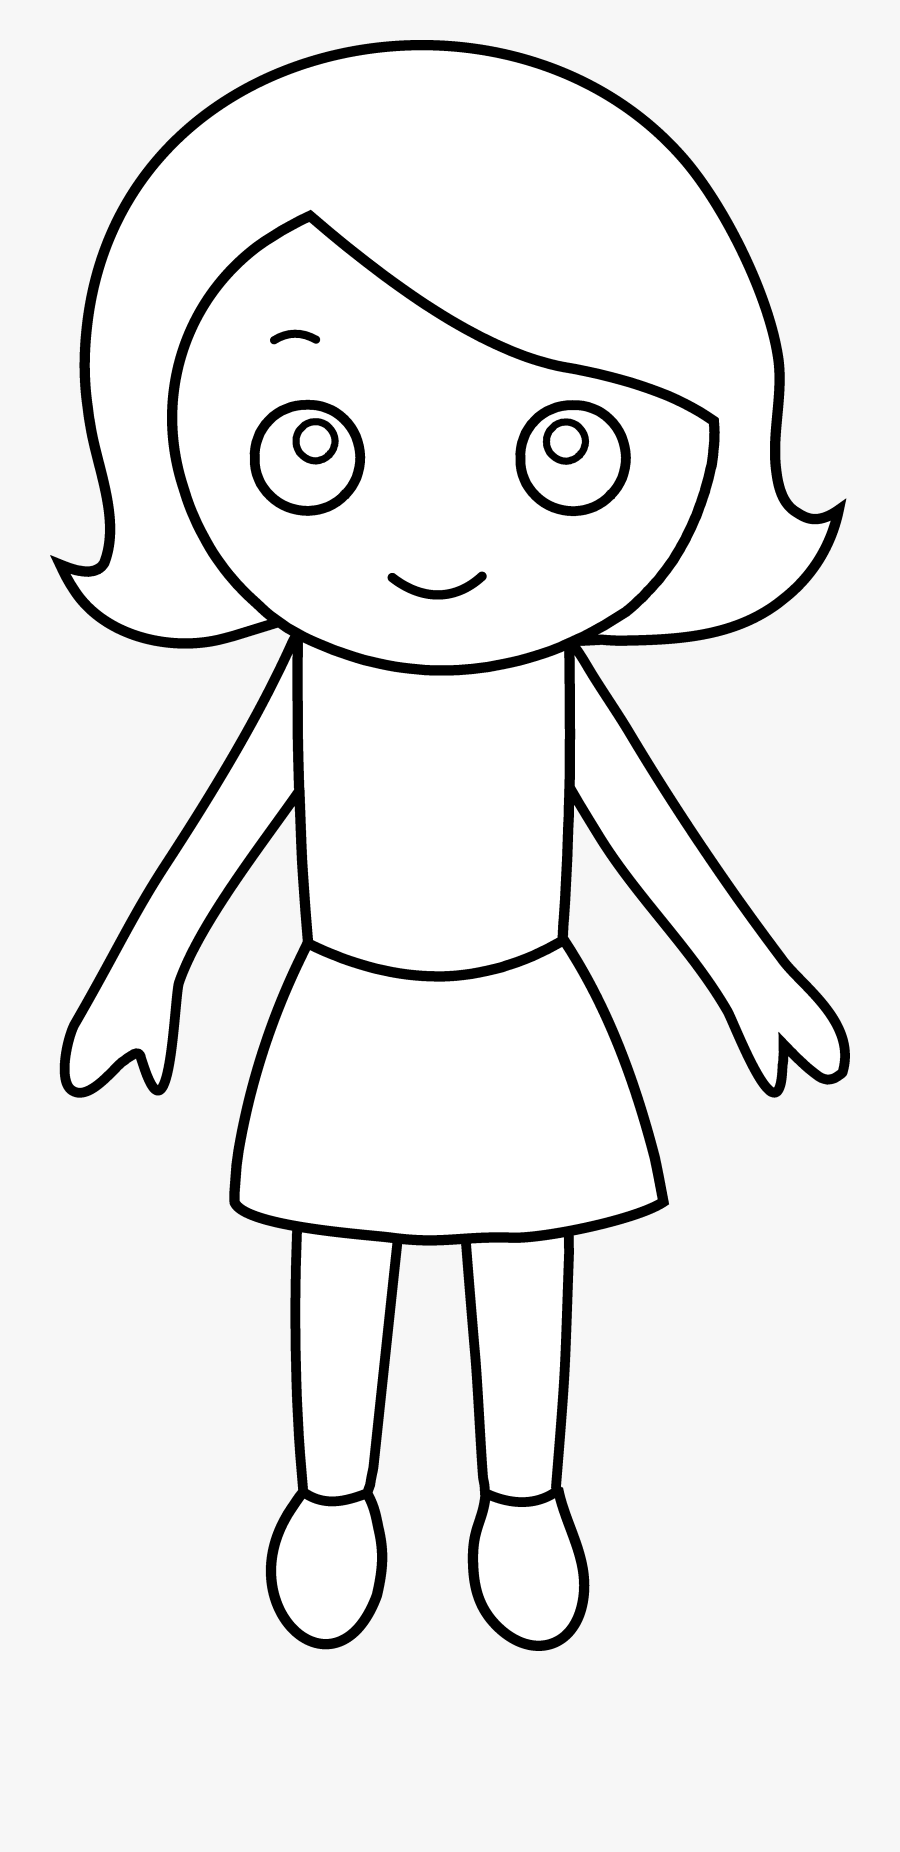 Drawing Little Coloring Free - Little Kid Cartoon Outline, Transparent Clipart